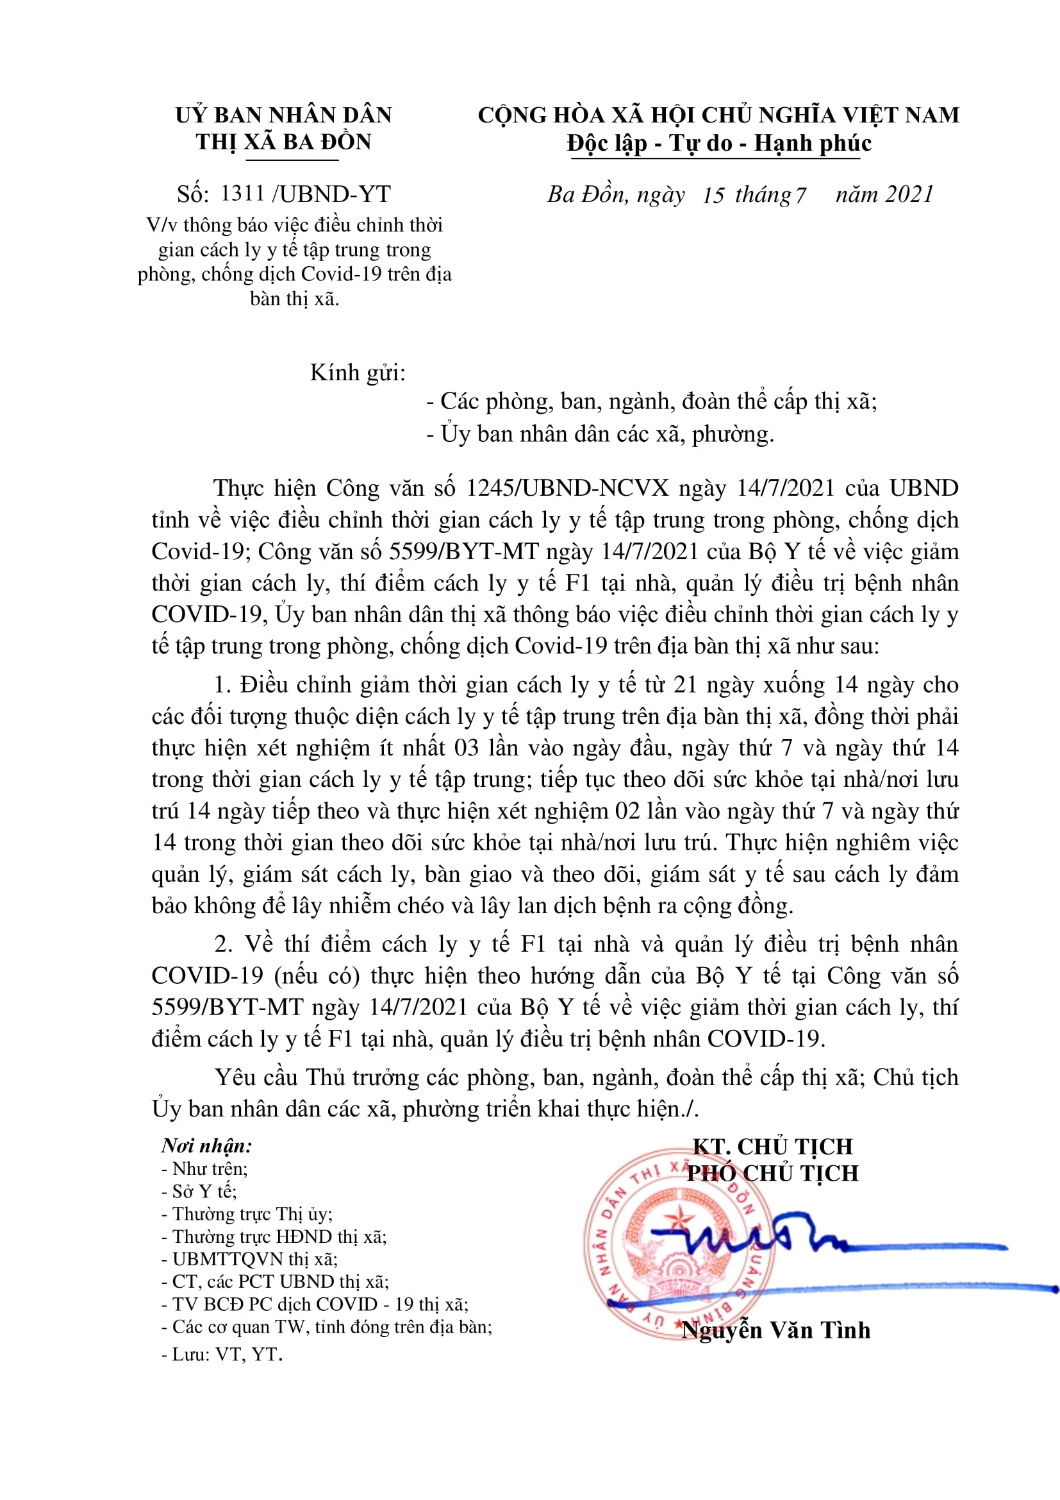 CV DIEU CHINH THOI GIAN CACH LY Y TE tuanpmbd 15 07 2021 09h53p59(15 07 2021 16h40p50) signed 1